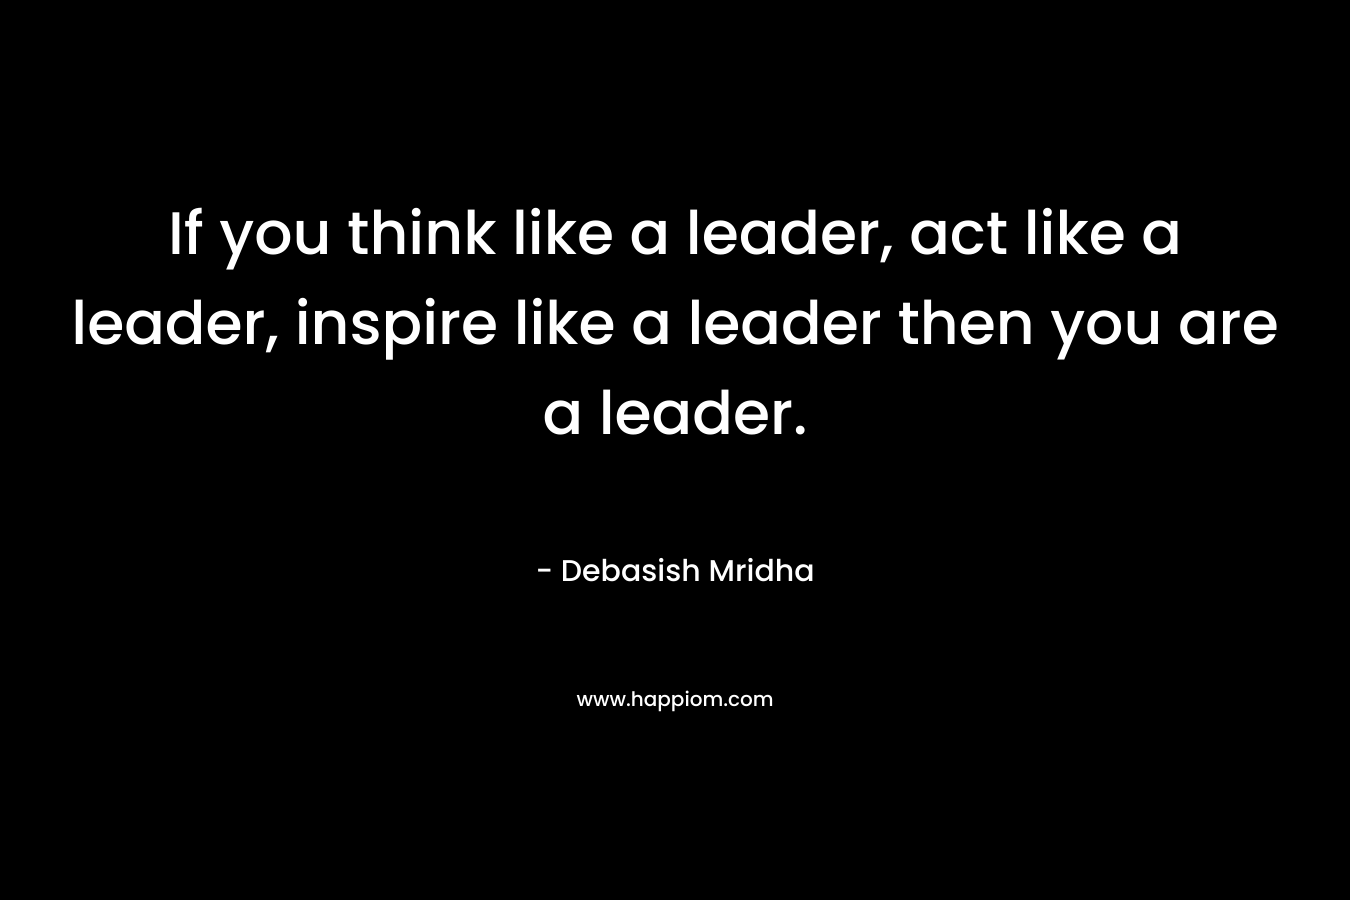 If you think like a leader, act like a leader, inspire like a leader then you are a leader.